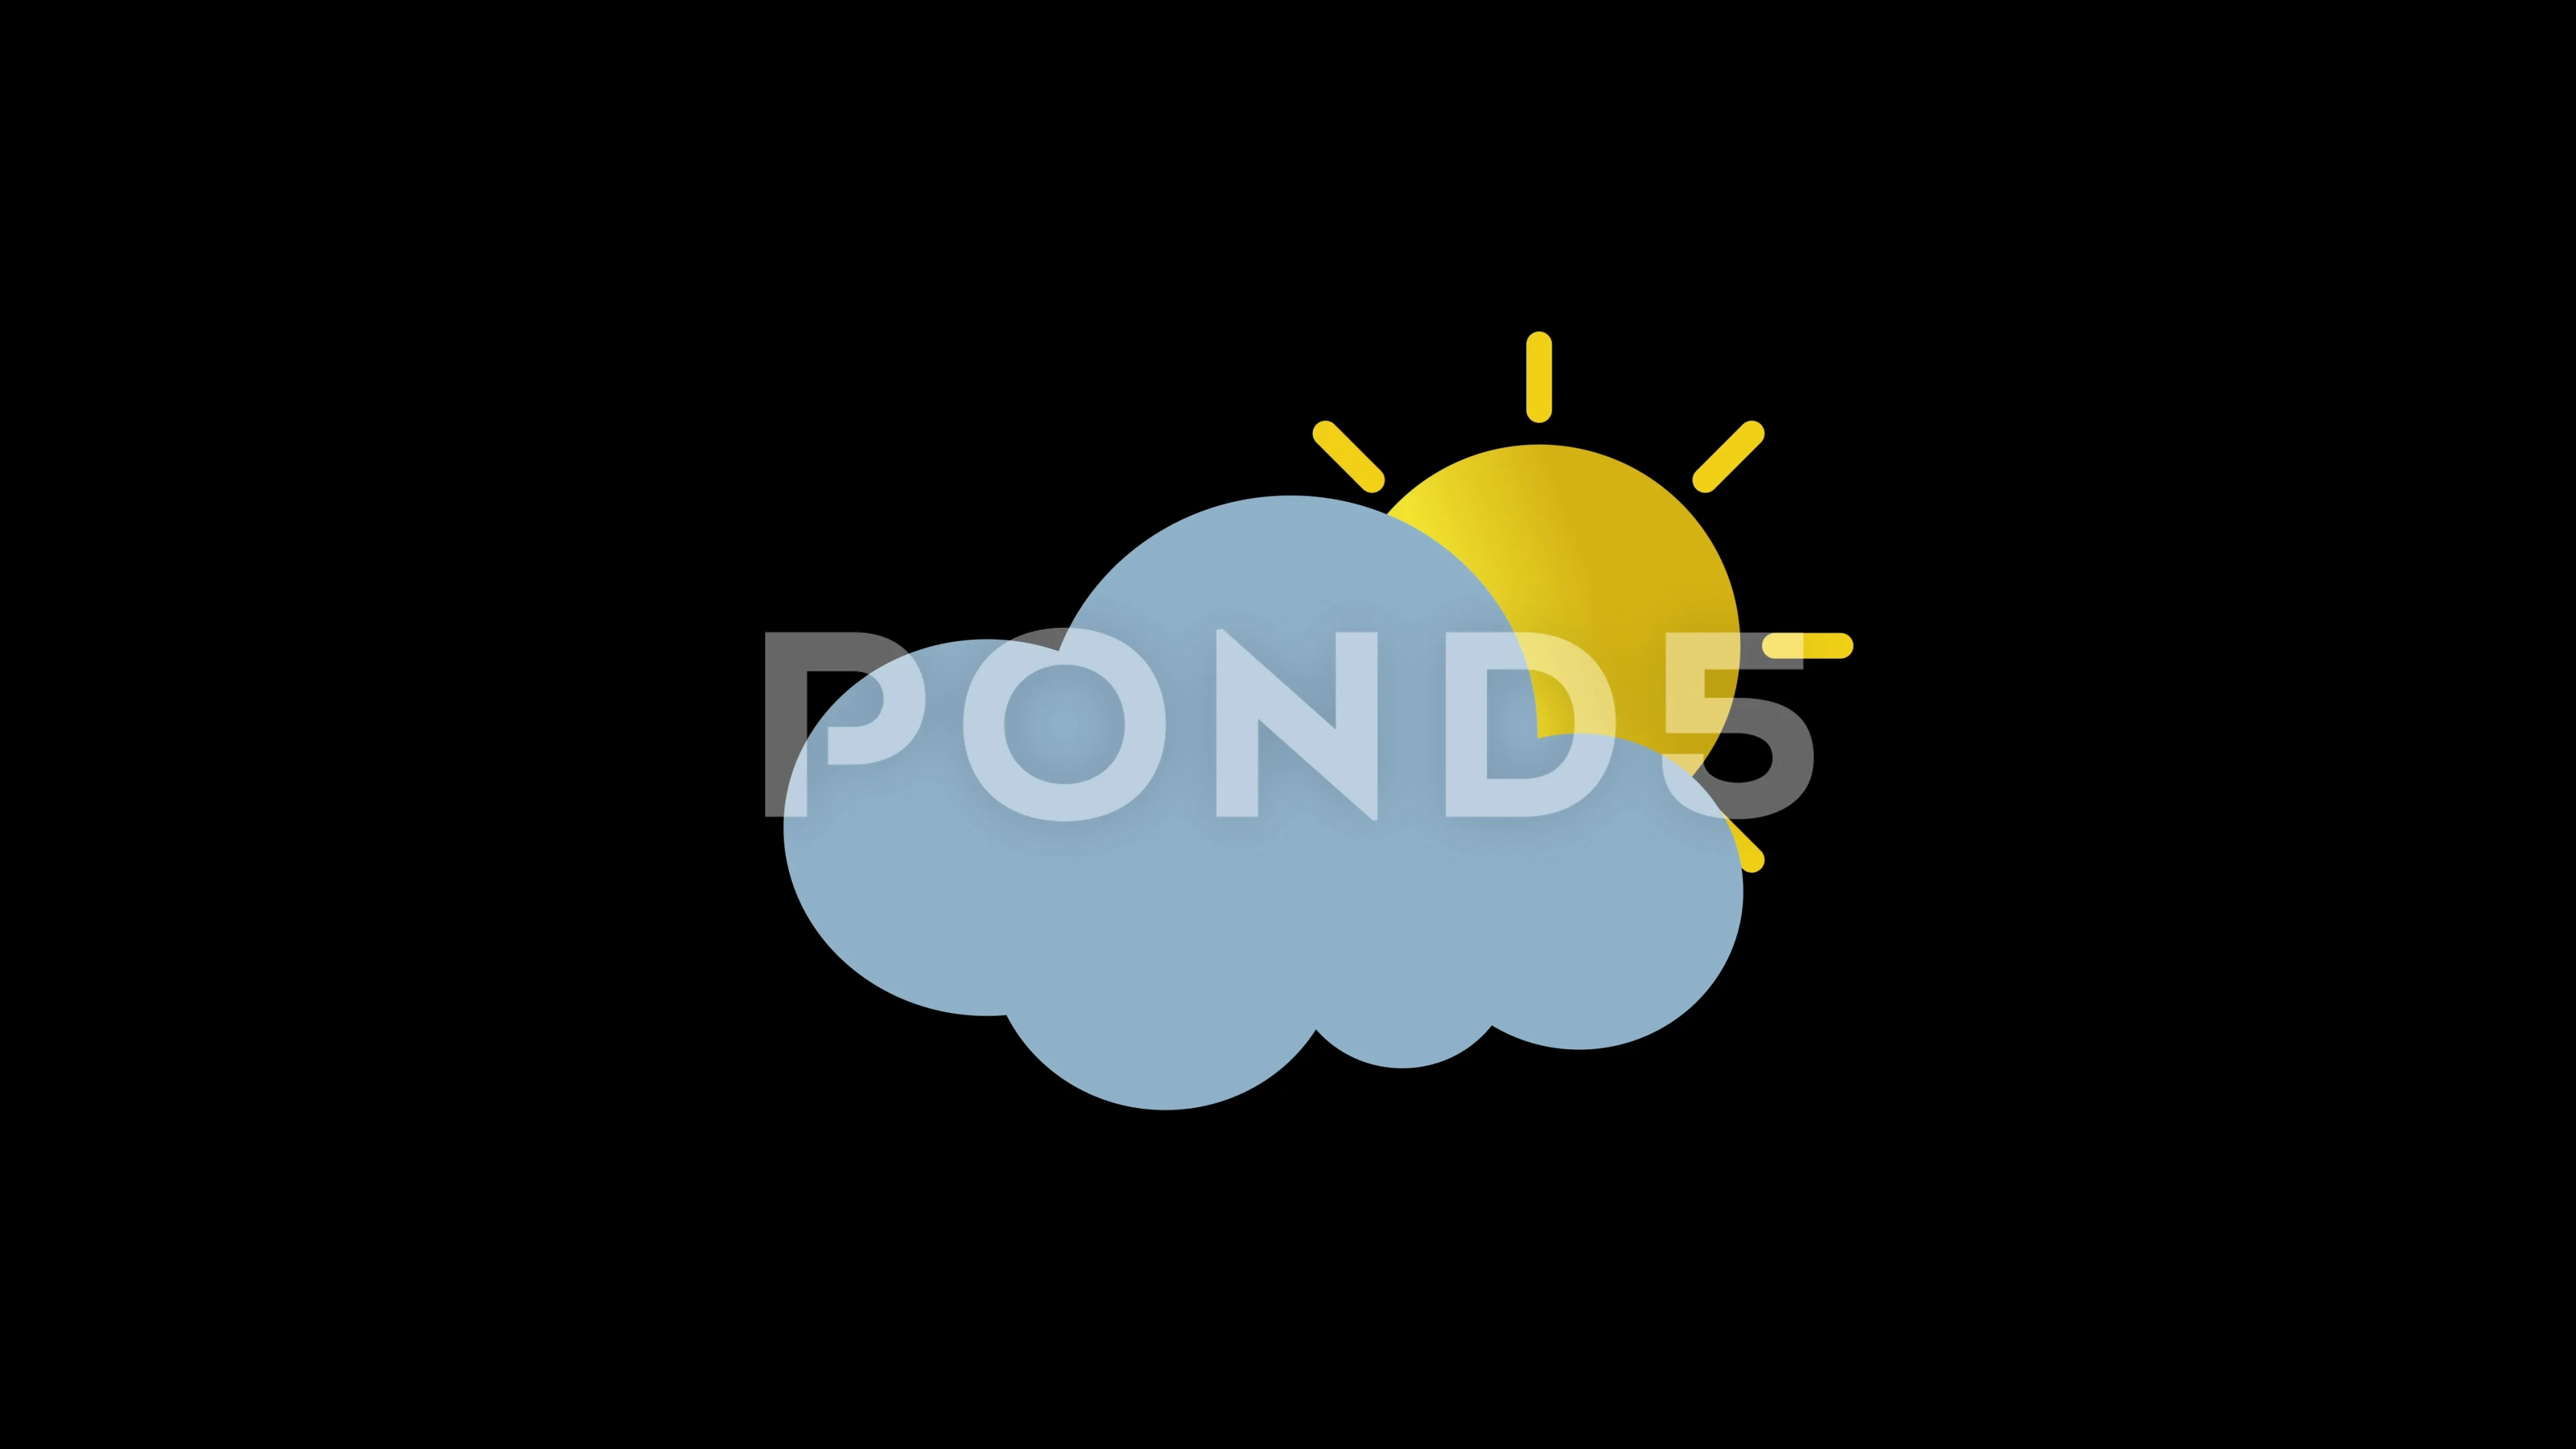 Clouds, cloudy, partly cloudy, weather forecast icon - Download on  Iconfinder